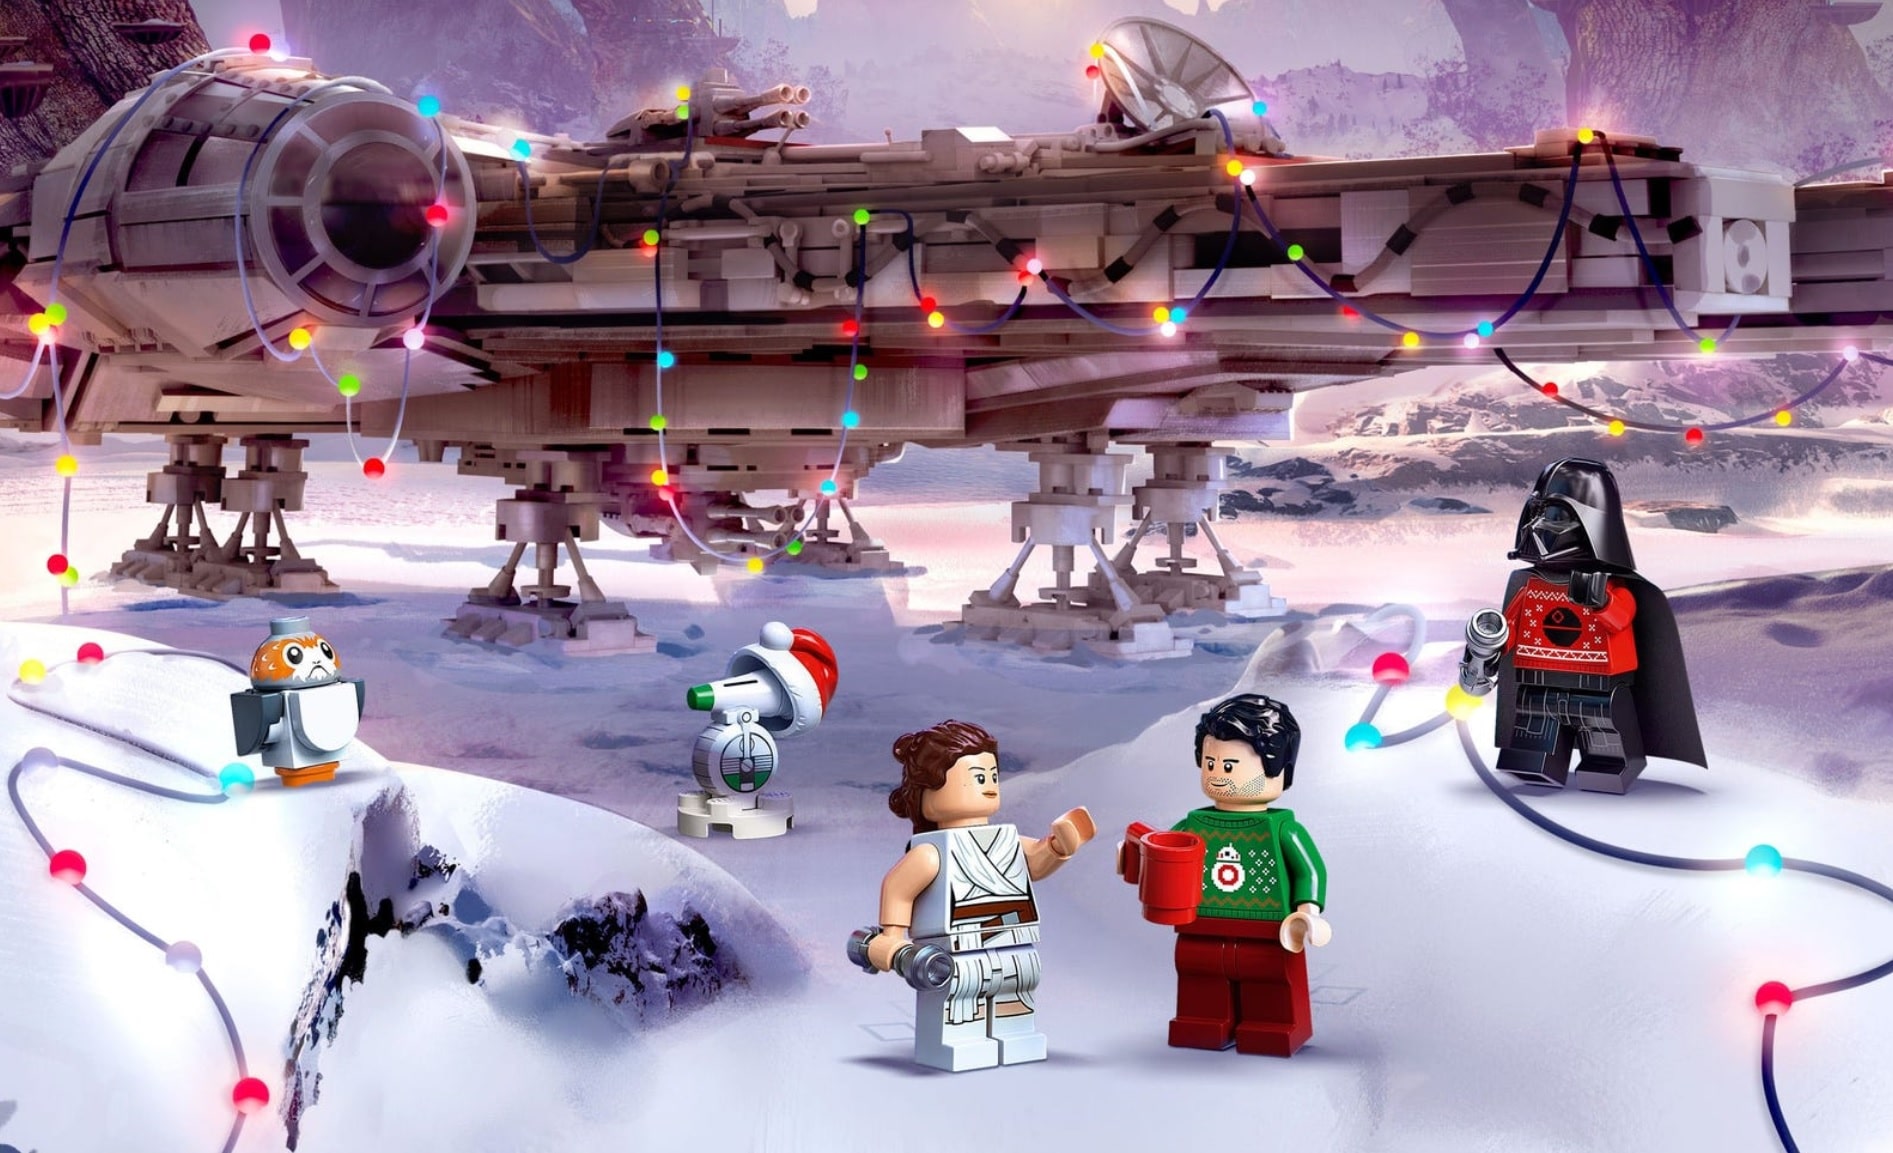 calendrier avent lego star wars